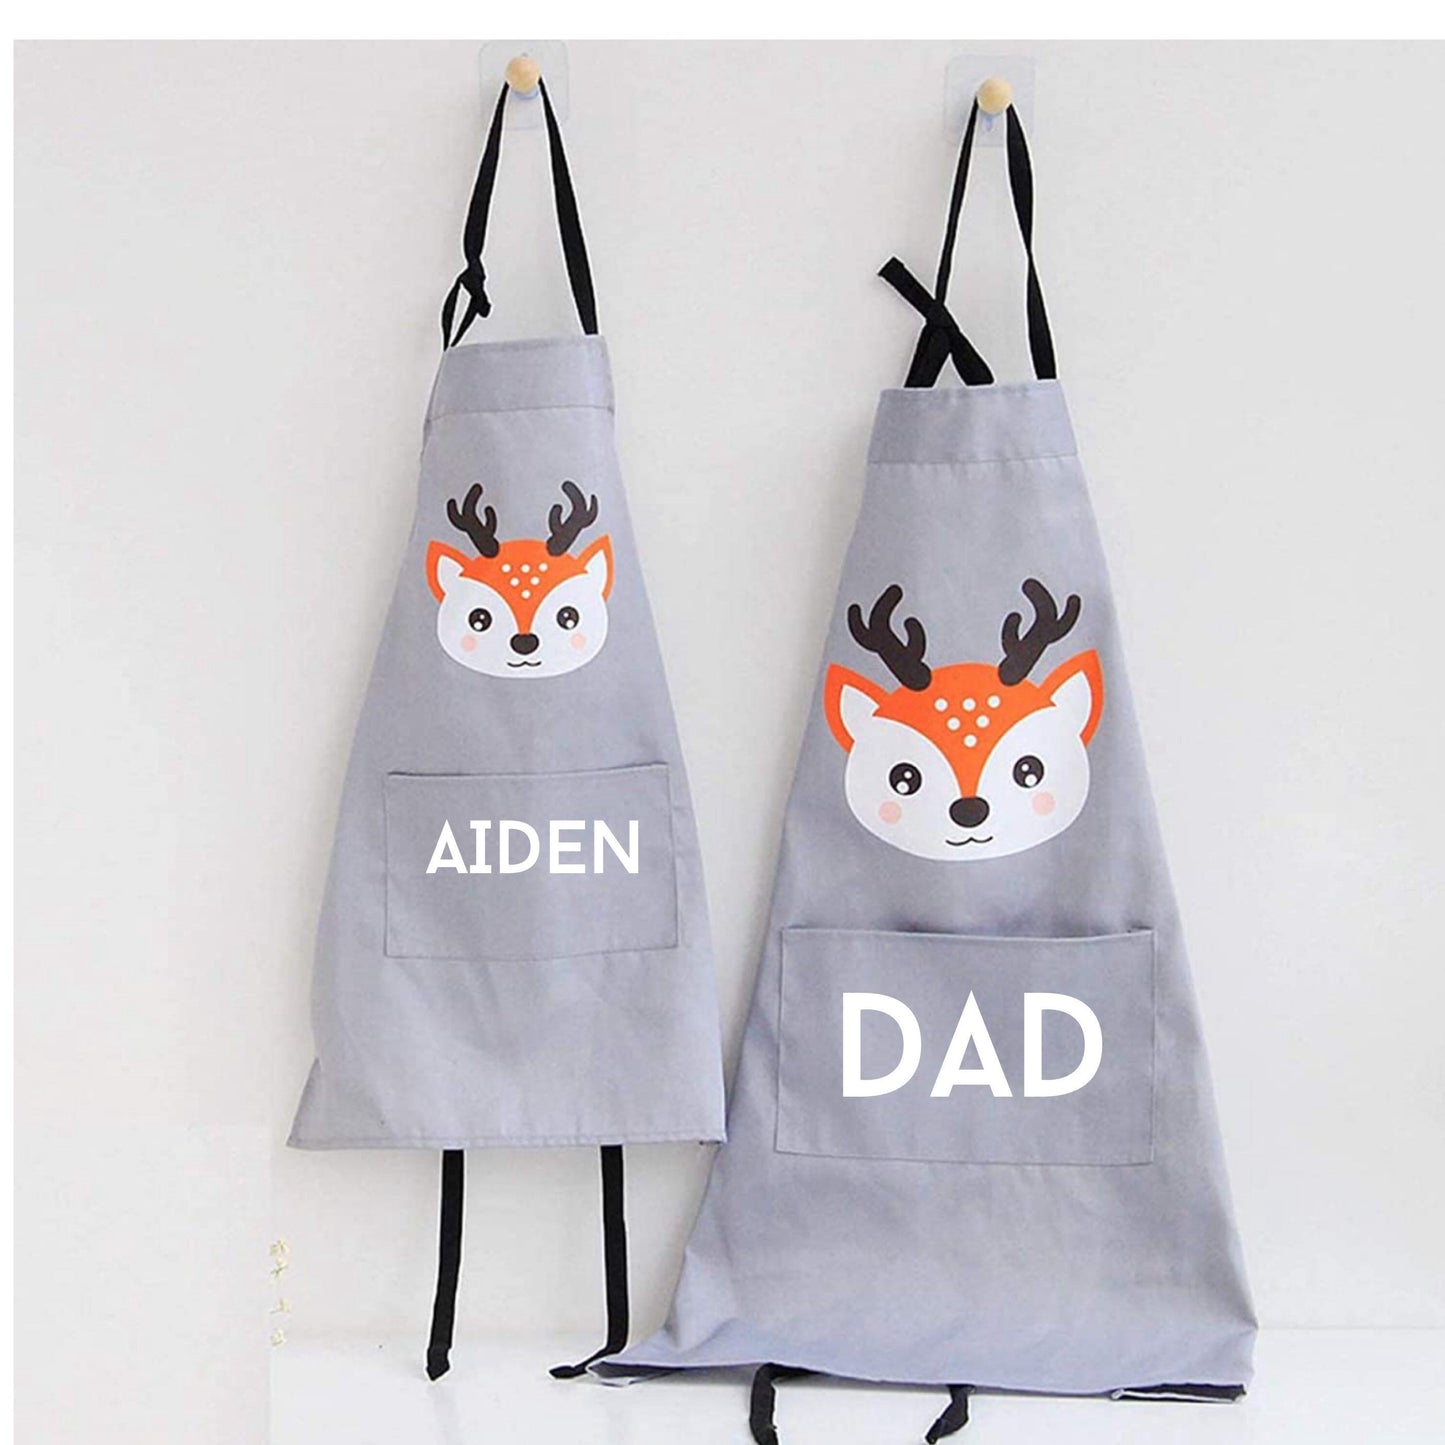 Daddy and me aprons, dad and kid cooking apron set, personalized apron, mommy and me set, cupcake apron set, matching aprons, custom aprons